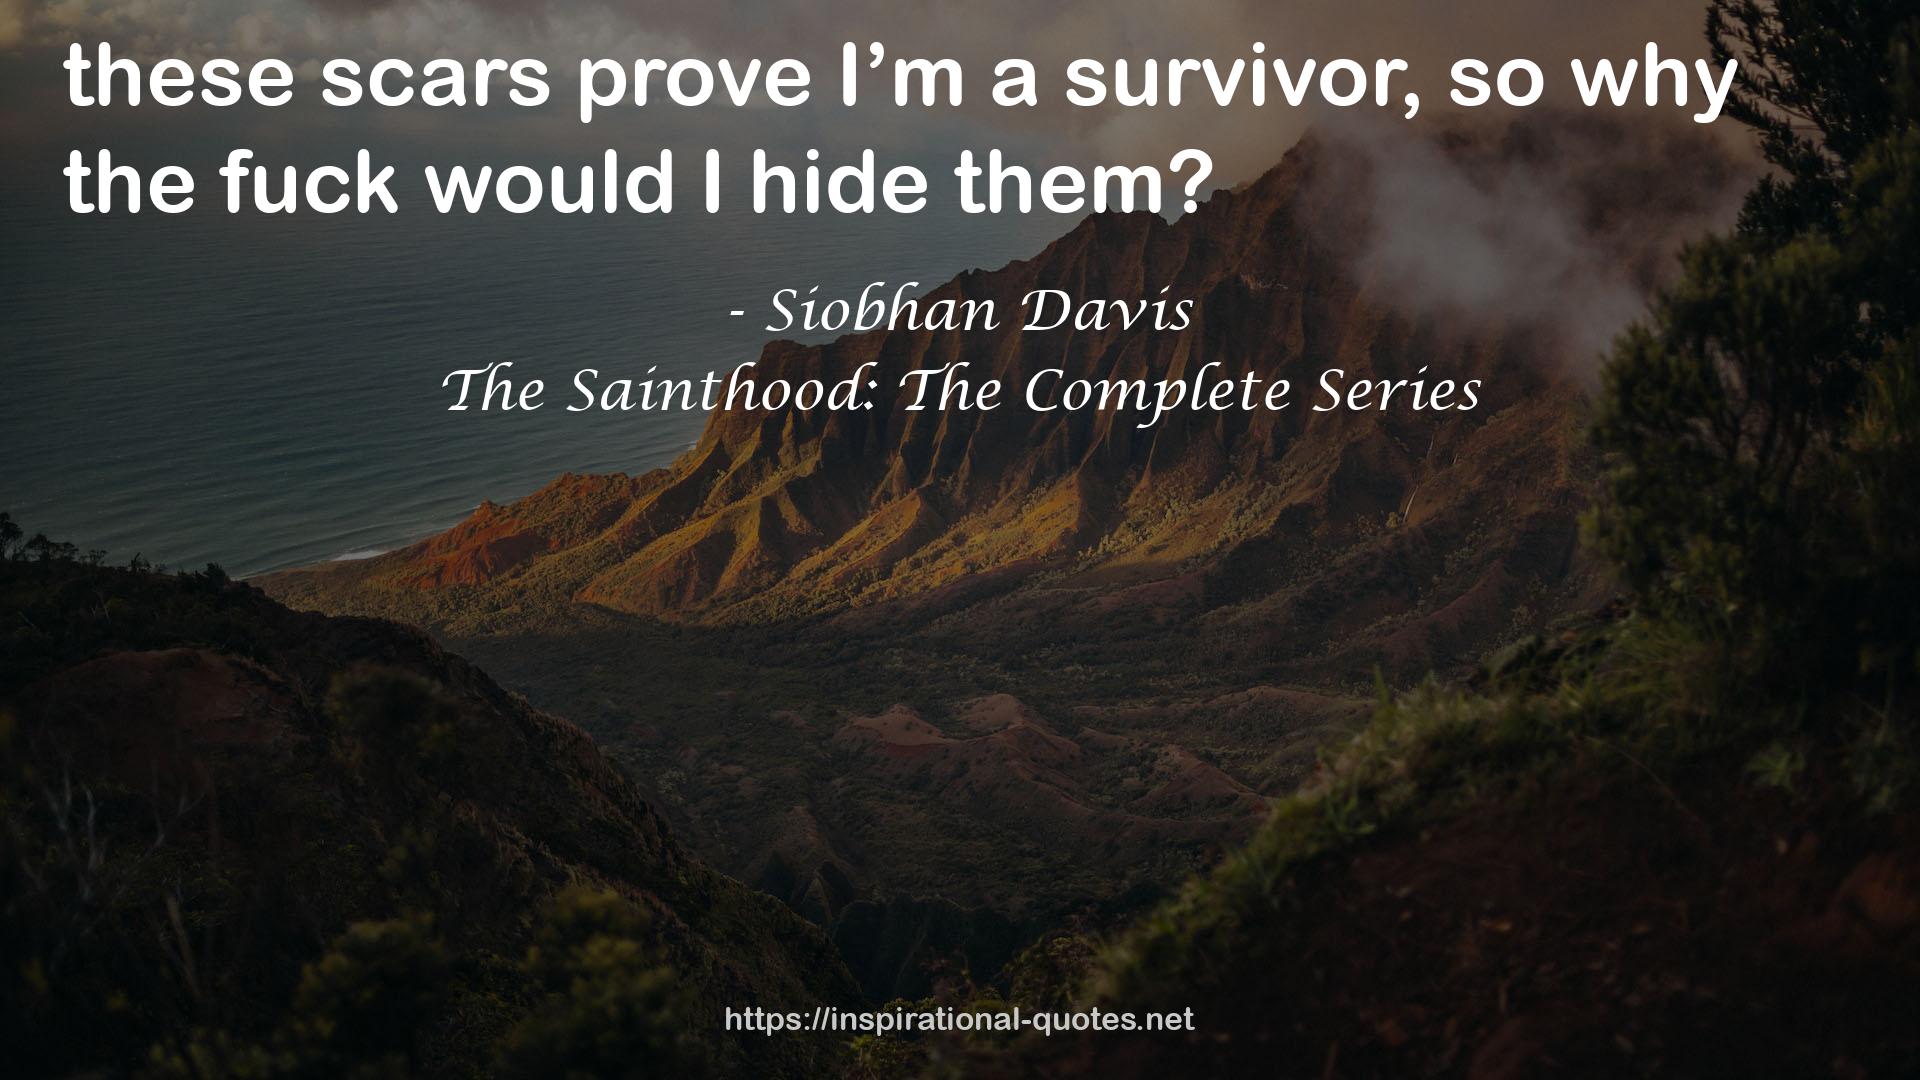 The Sainthood: The Complete Series QUOTES